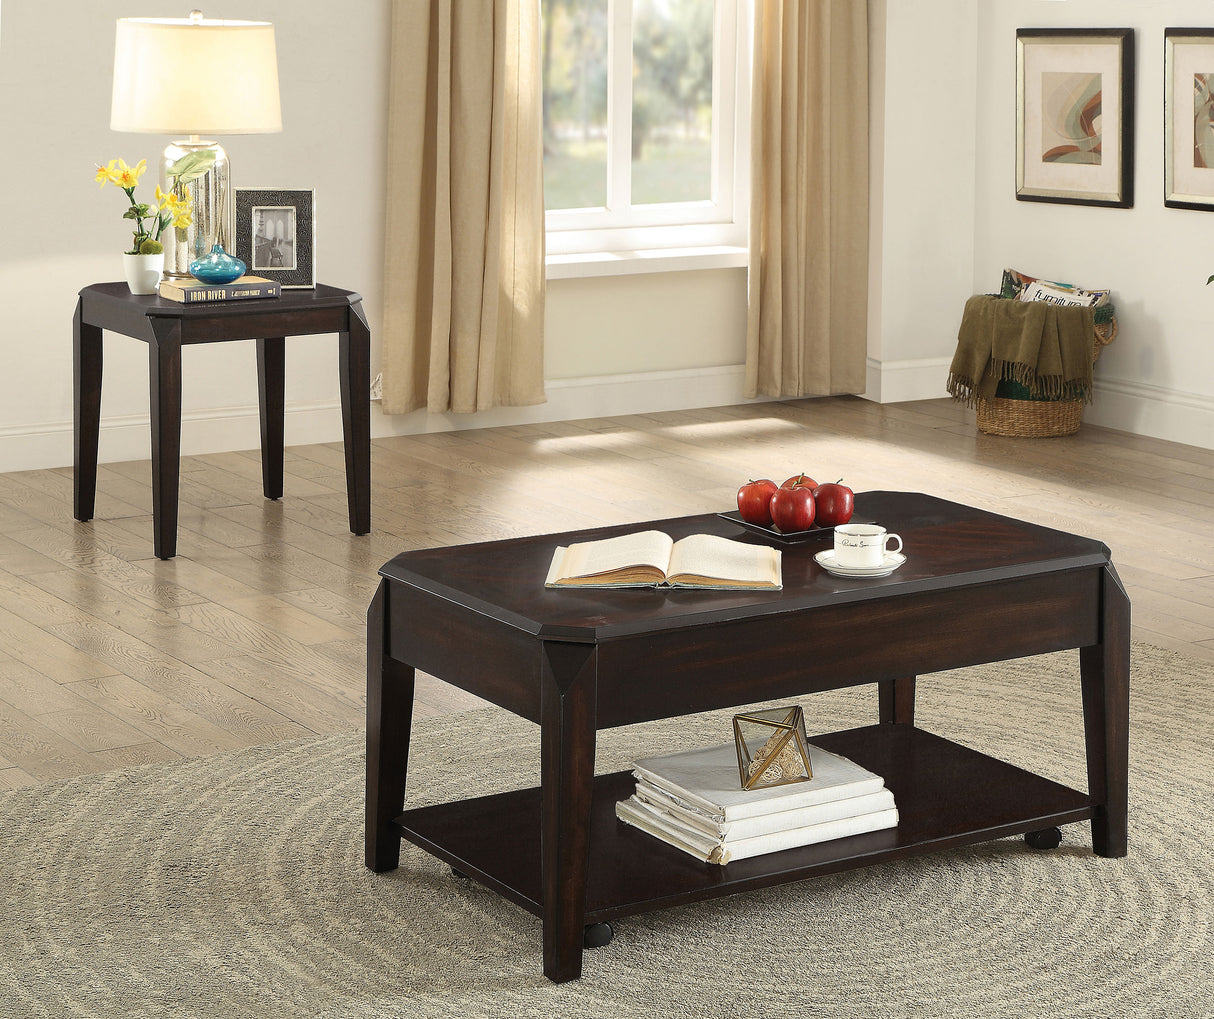 End Table - Baylor Square End Table Walnut